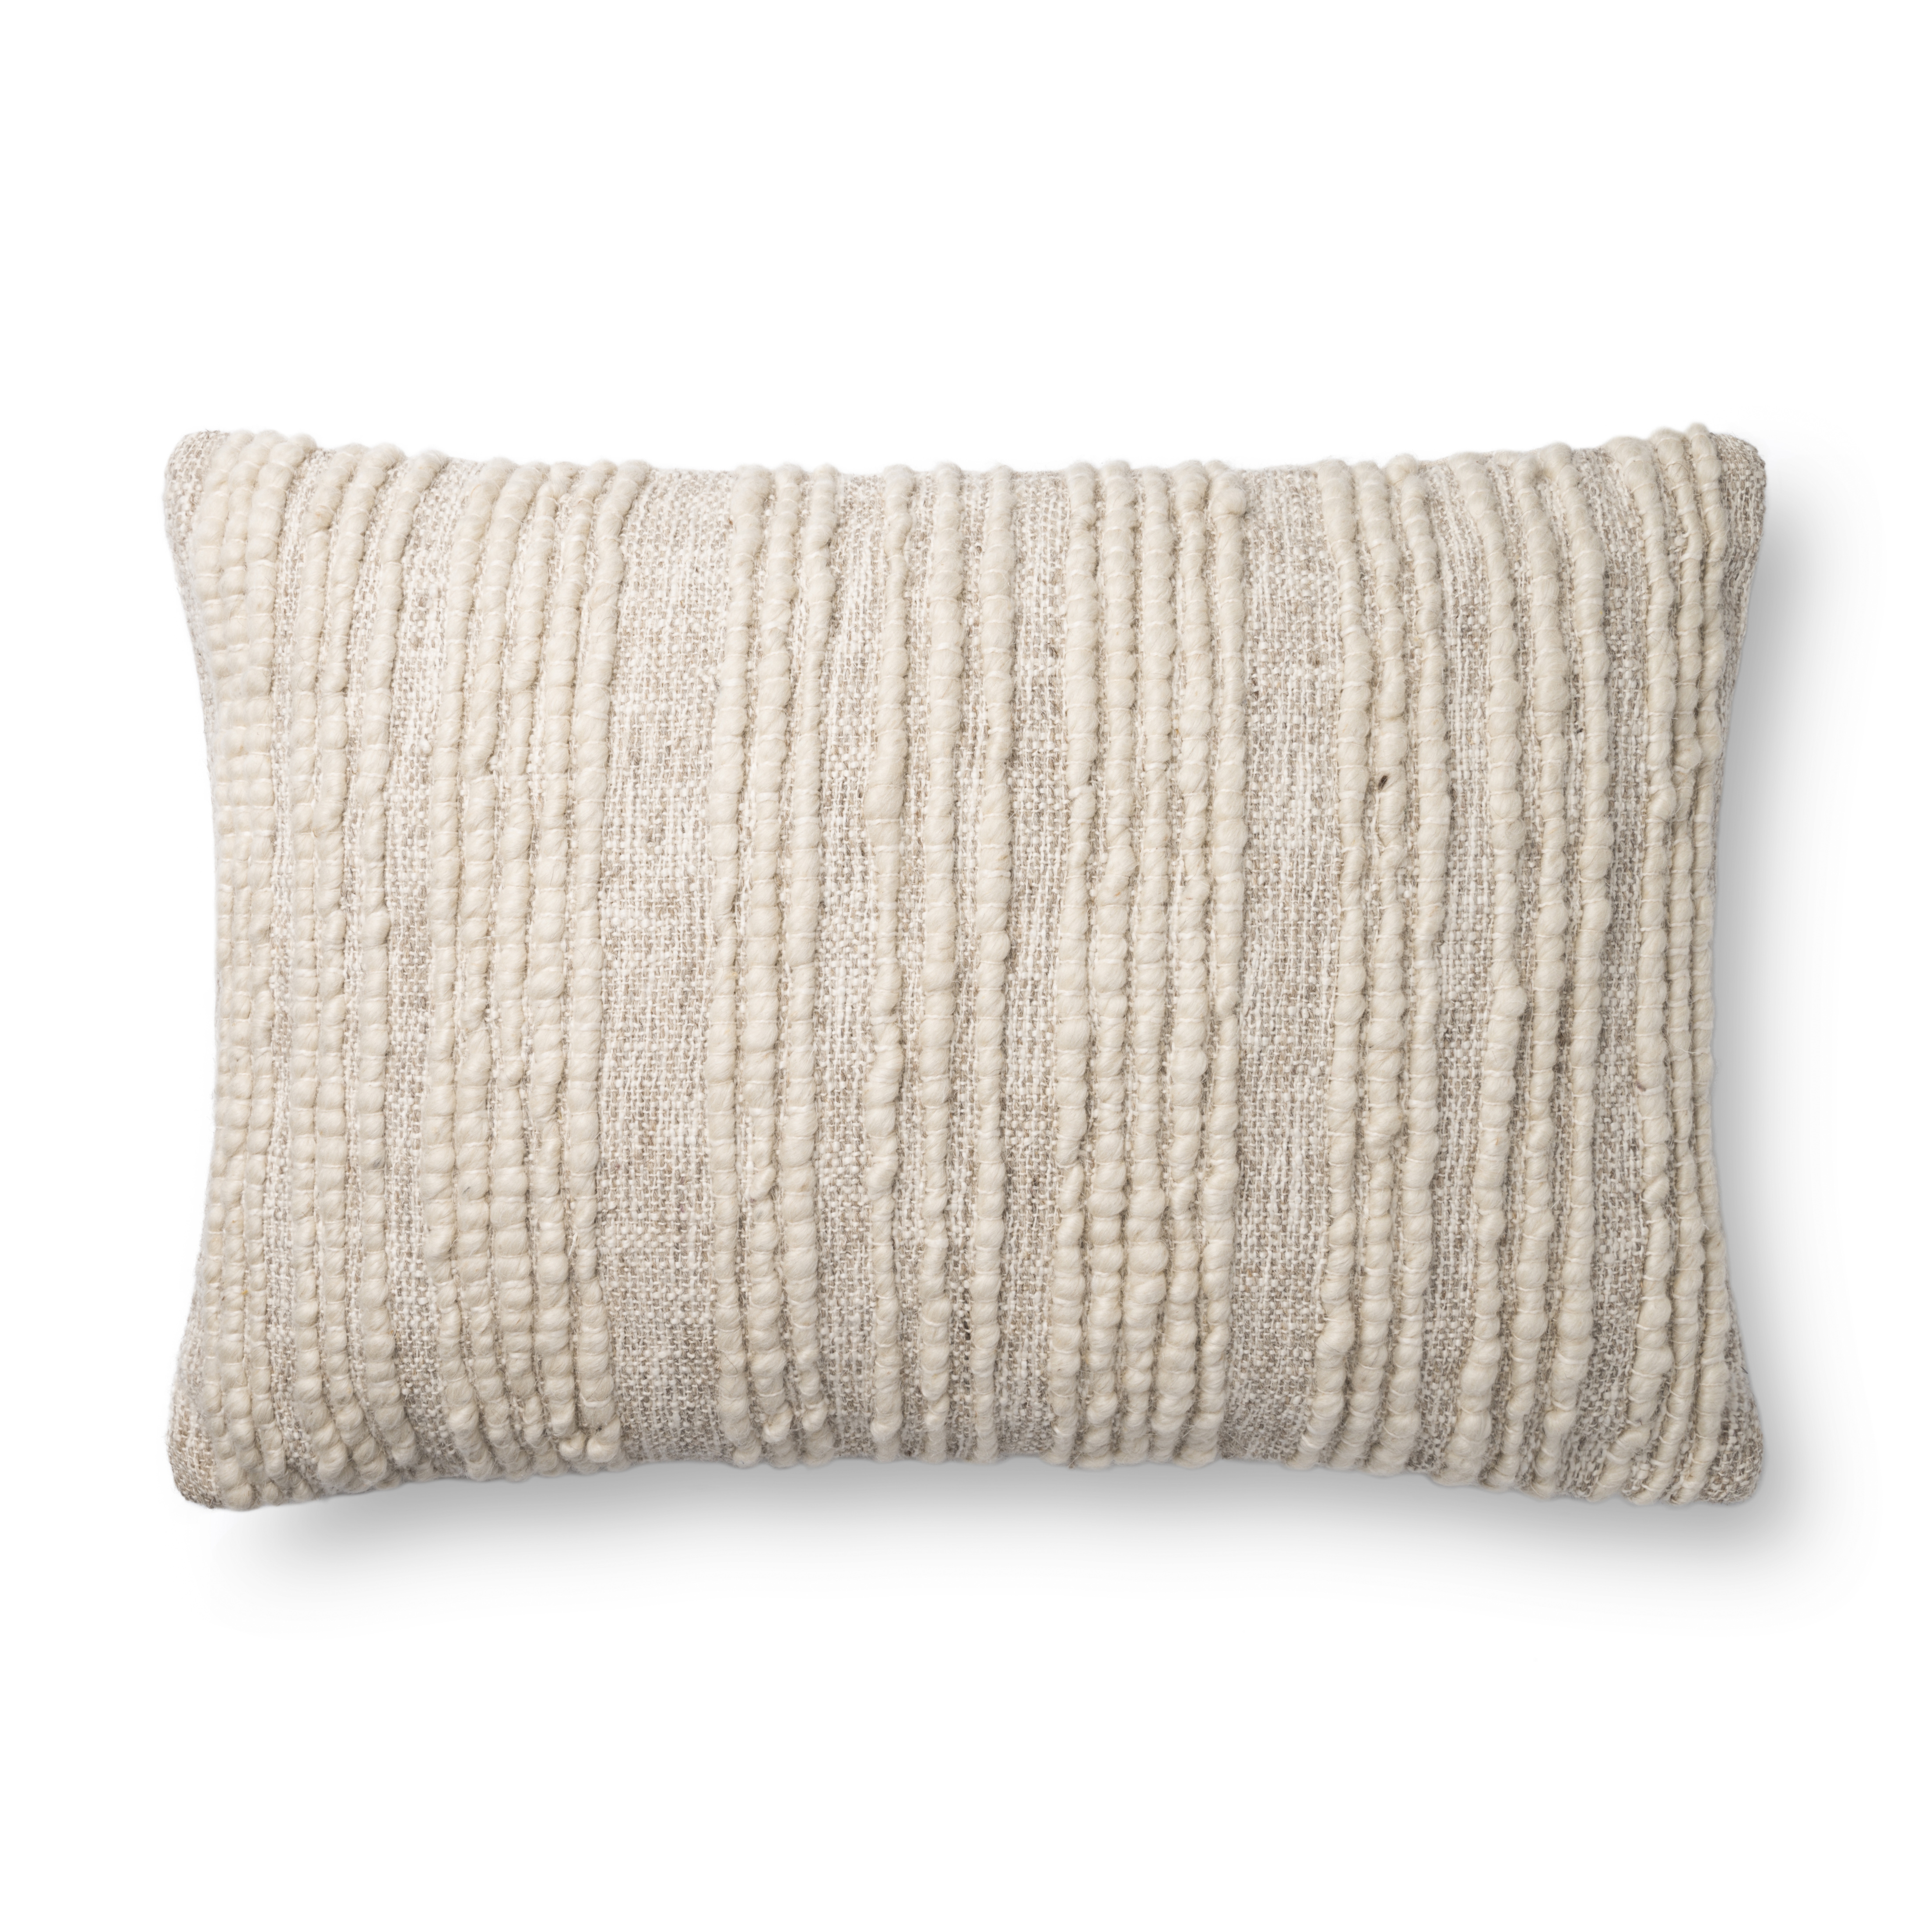 Loloi Pillows P0862 Natural 22" x 22" Cover Only - Loloi Rugs